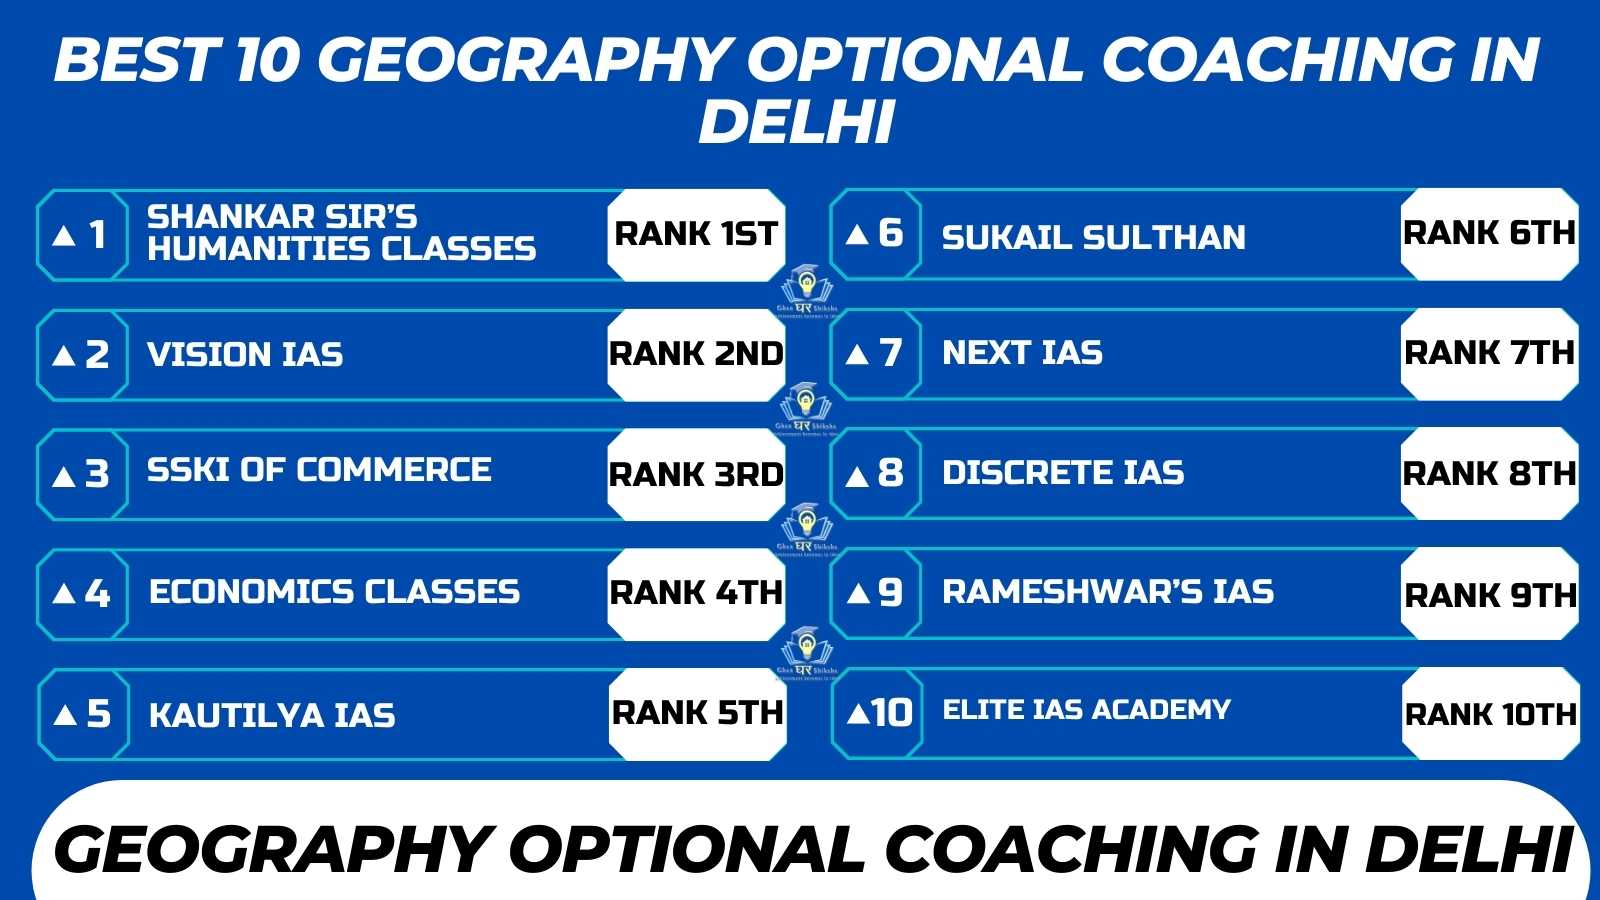 Top 10 Geography Optional Coaching In Delhi